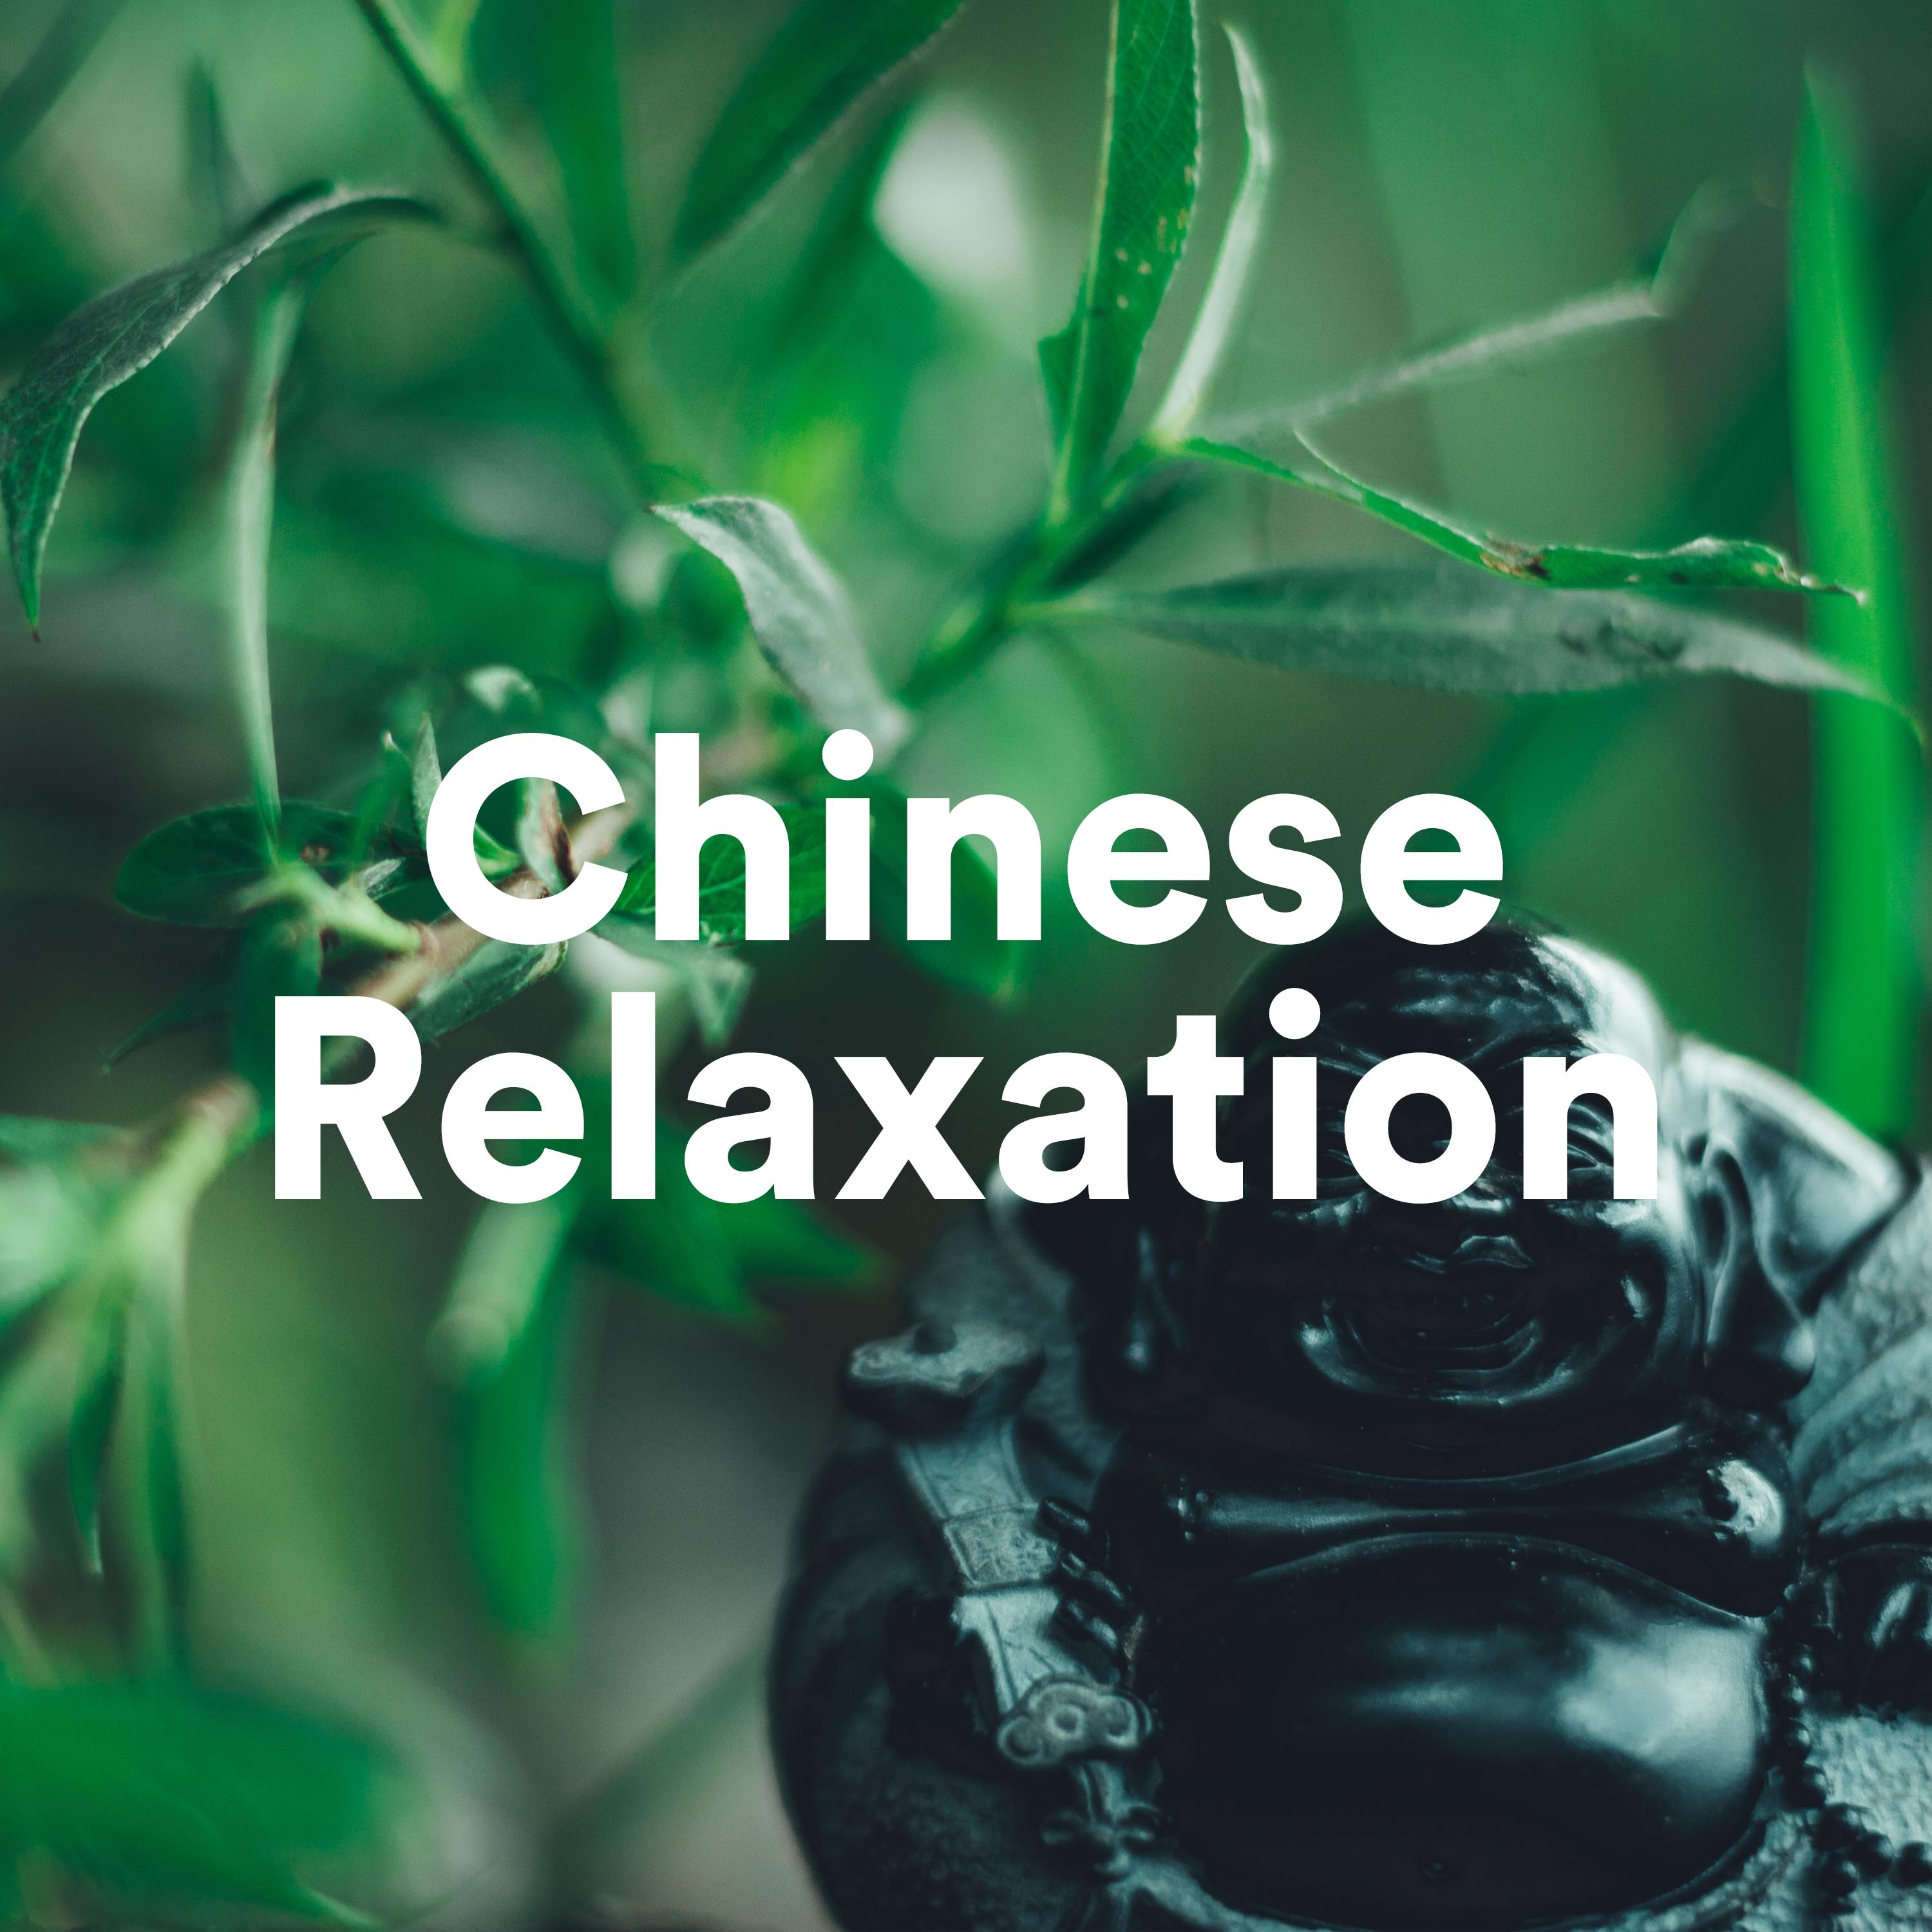 Chinese Relaxation - Nature Sounds, Relaxing Music, Zen Instrumental Music